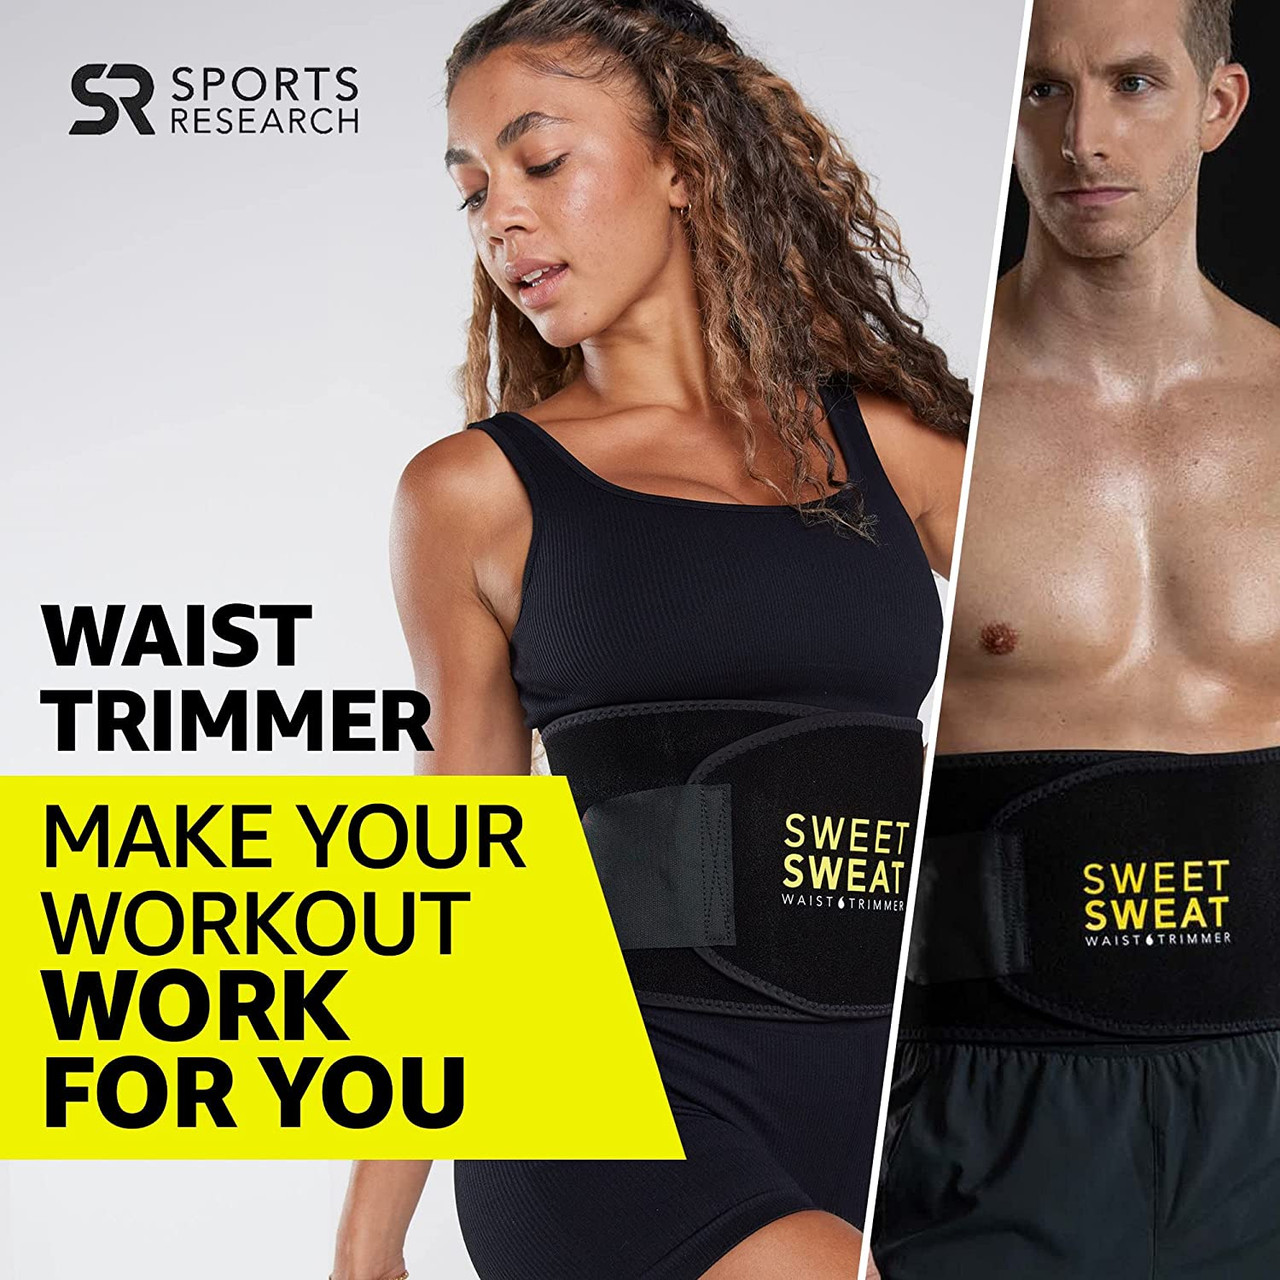 Sweet Sweat Waist Trimmer by Sports Research Sweat Band Increases